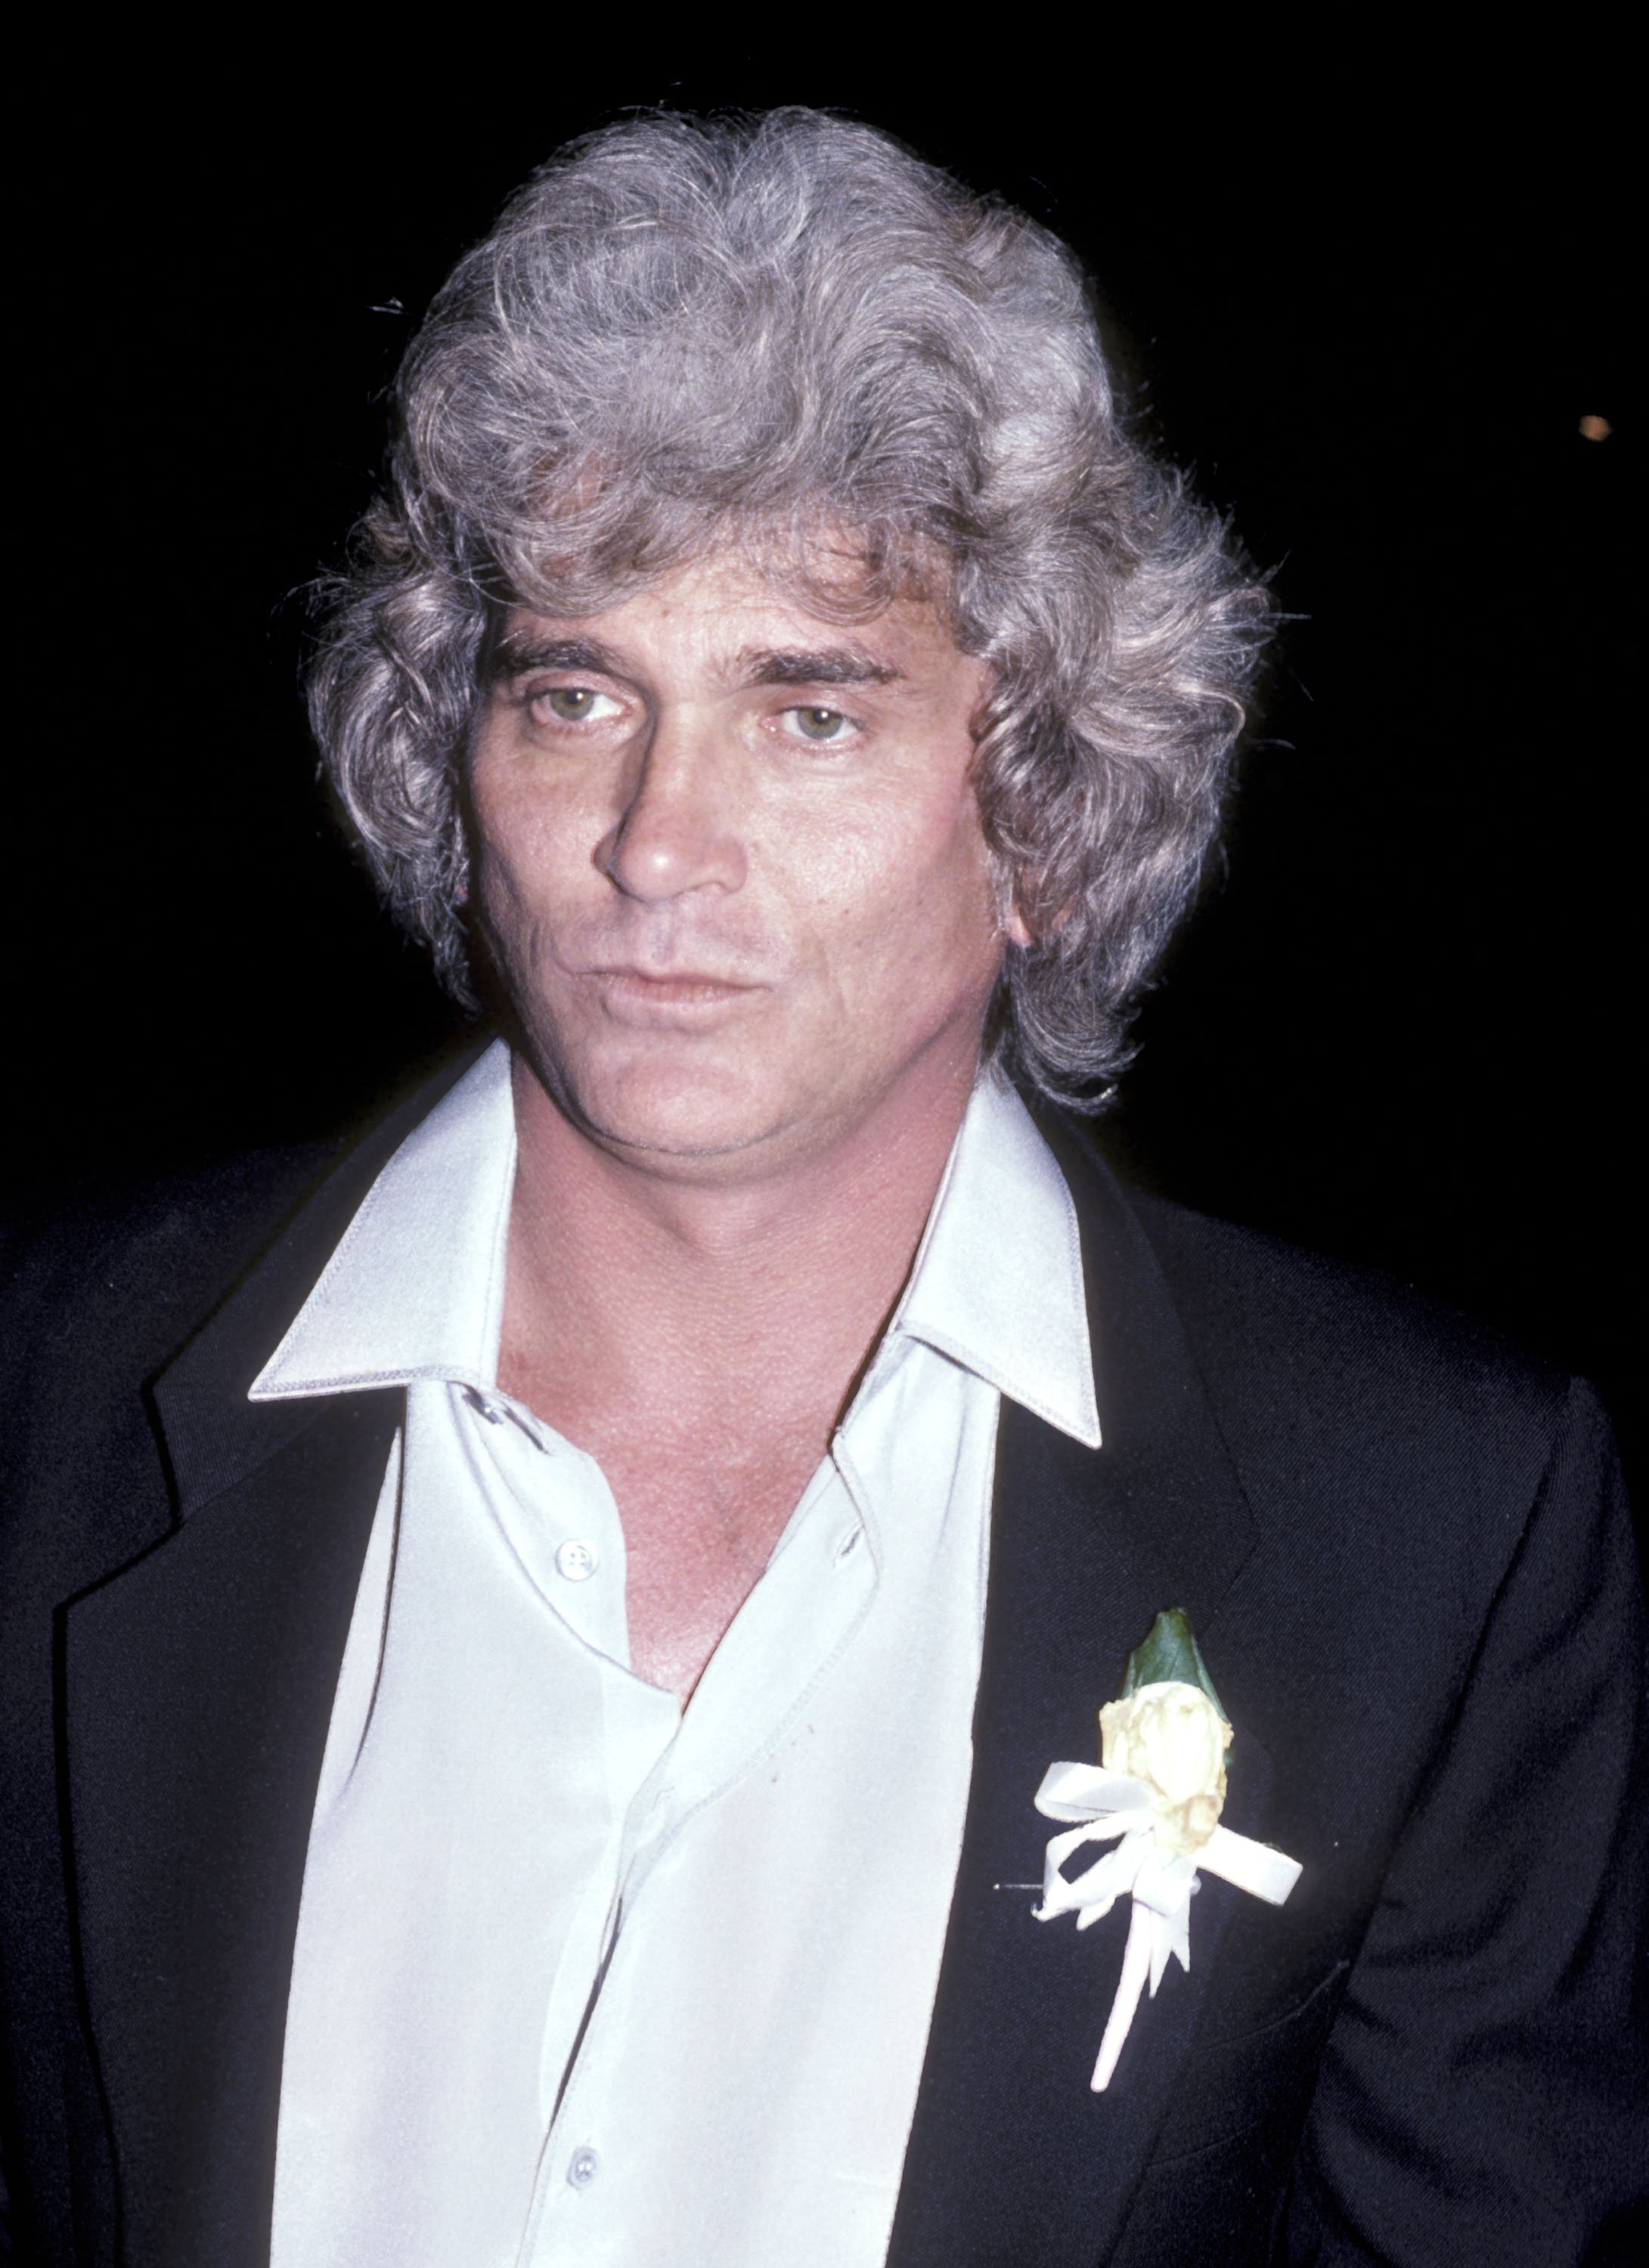 Actor Michael Landon attends his wedding reception on February 14, 1983 at La Scala Restaurant in Beverly Hills, California. | Source: Getty Images